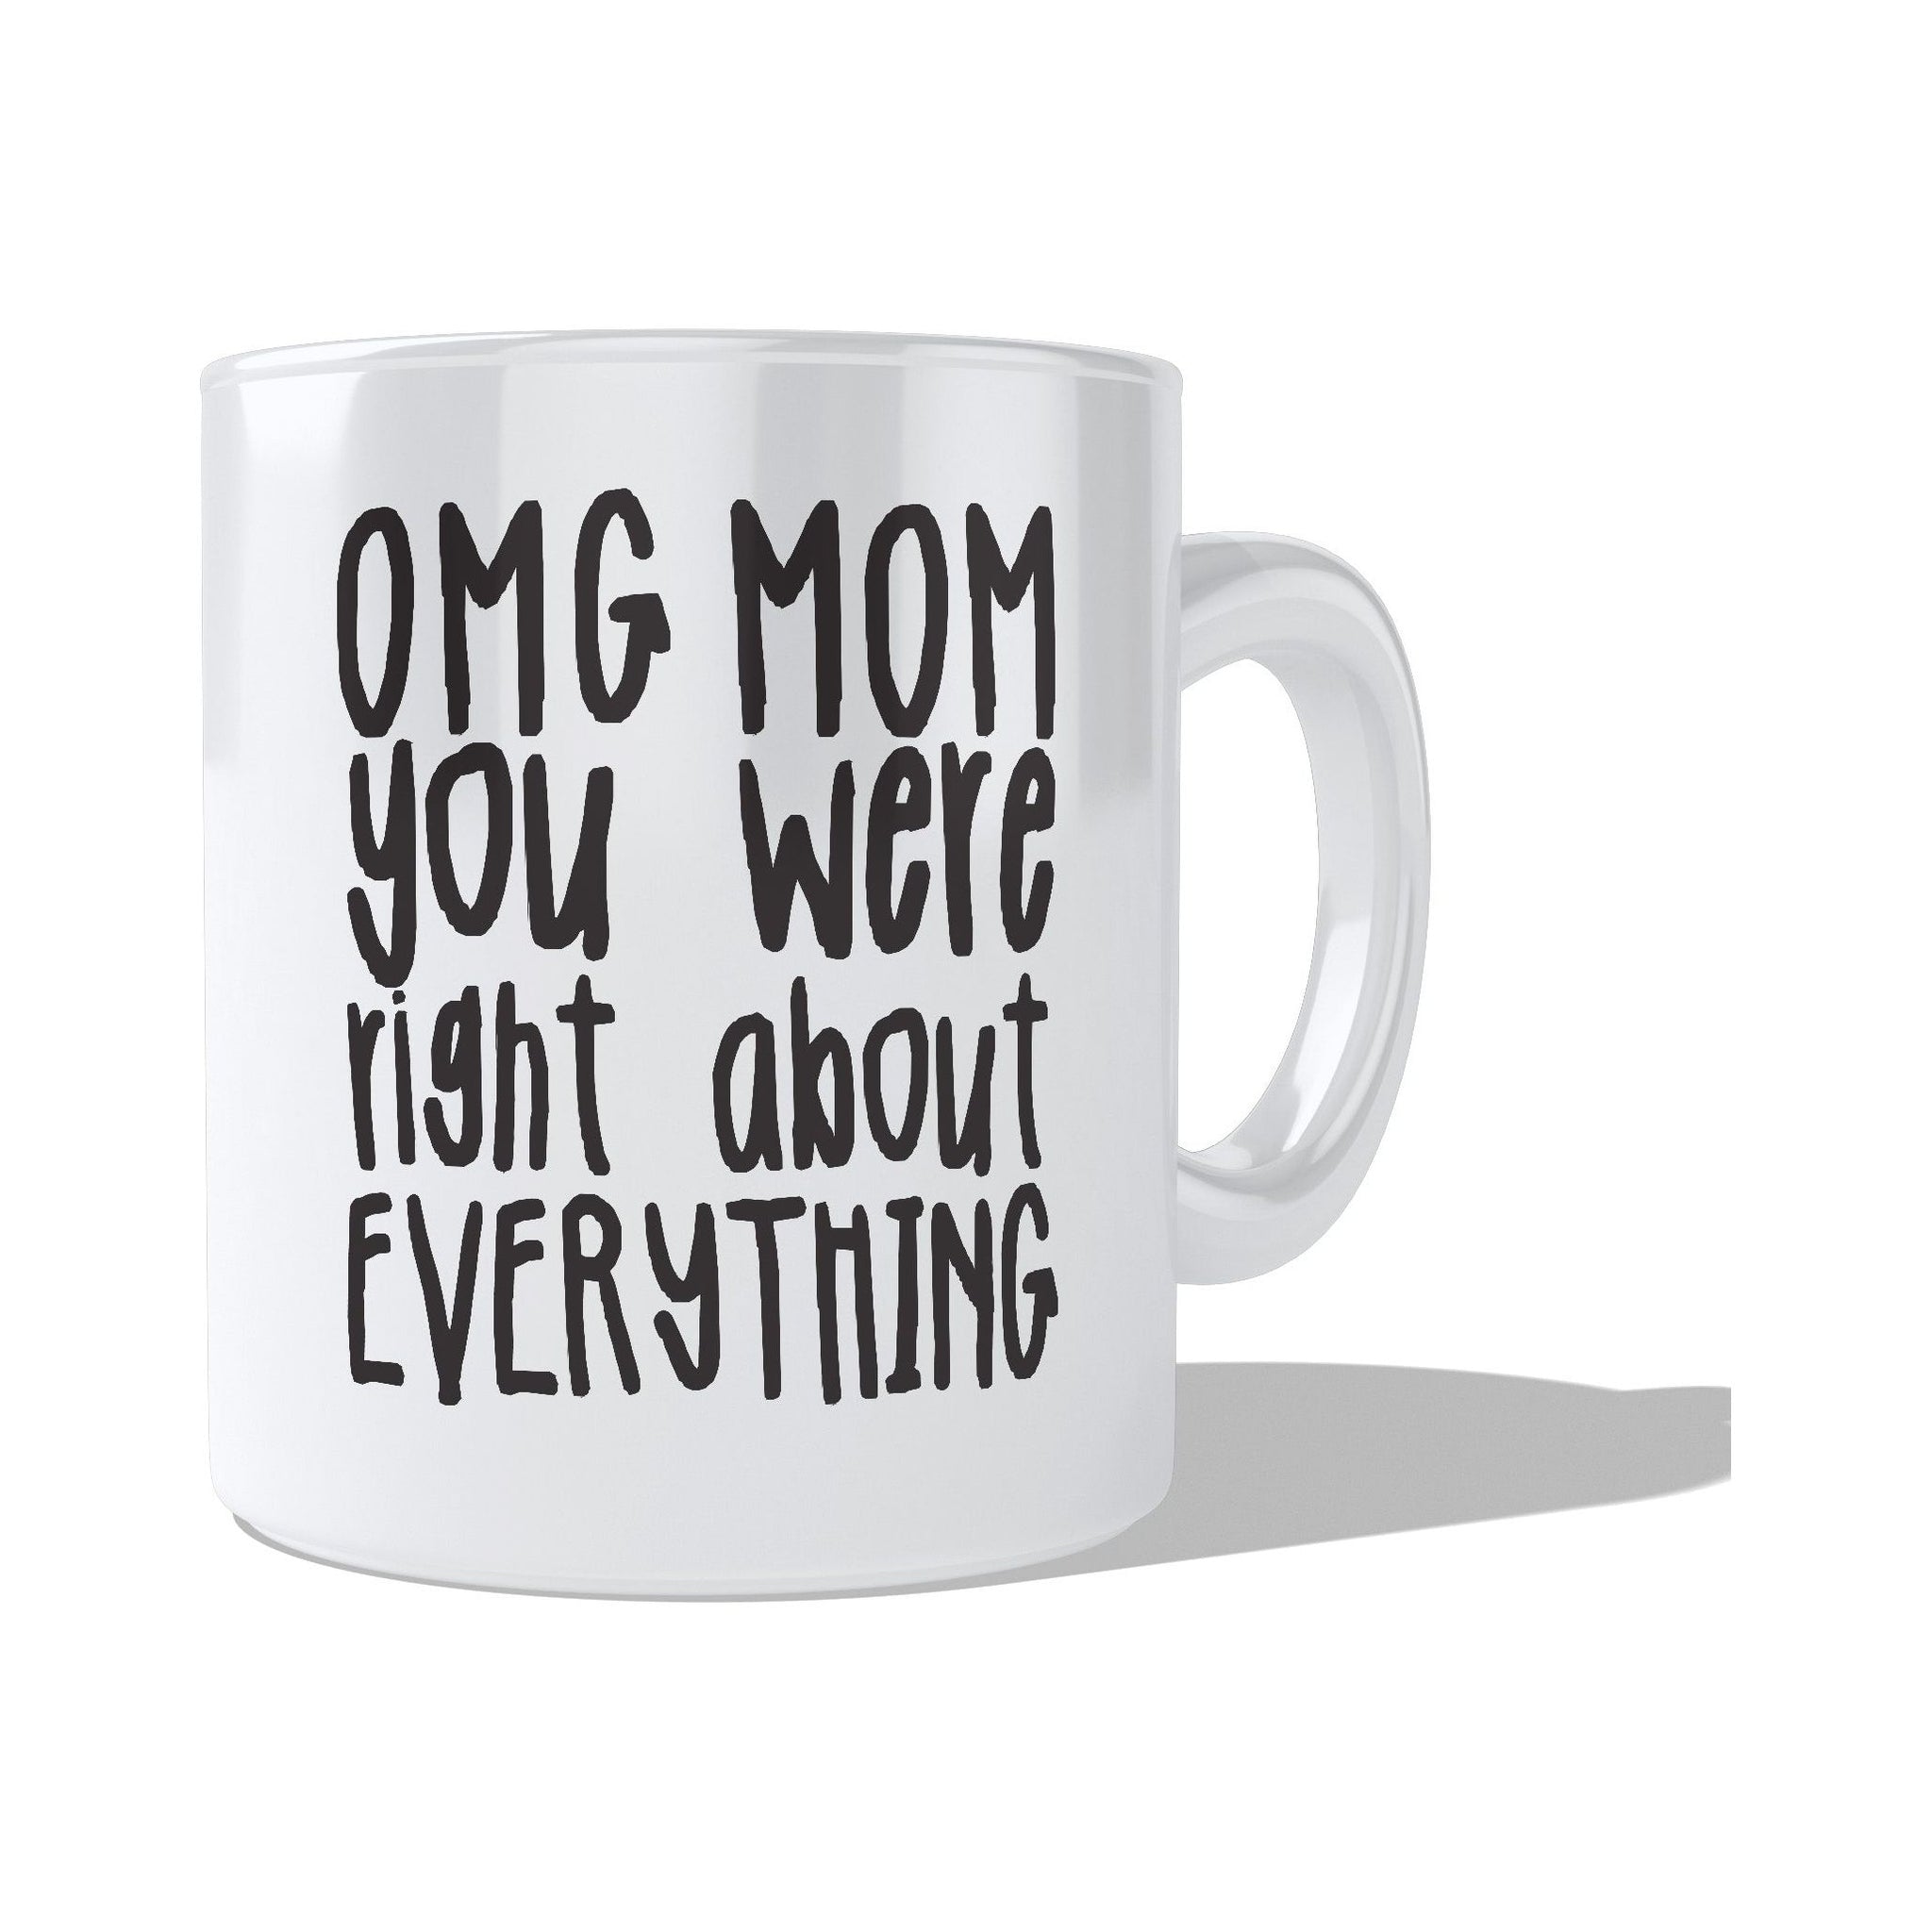 OMG mom you were right about everything  Coffee and Tea Ceramic  Mug 11oz